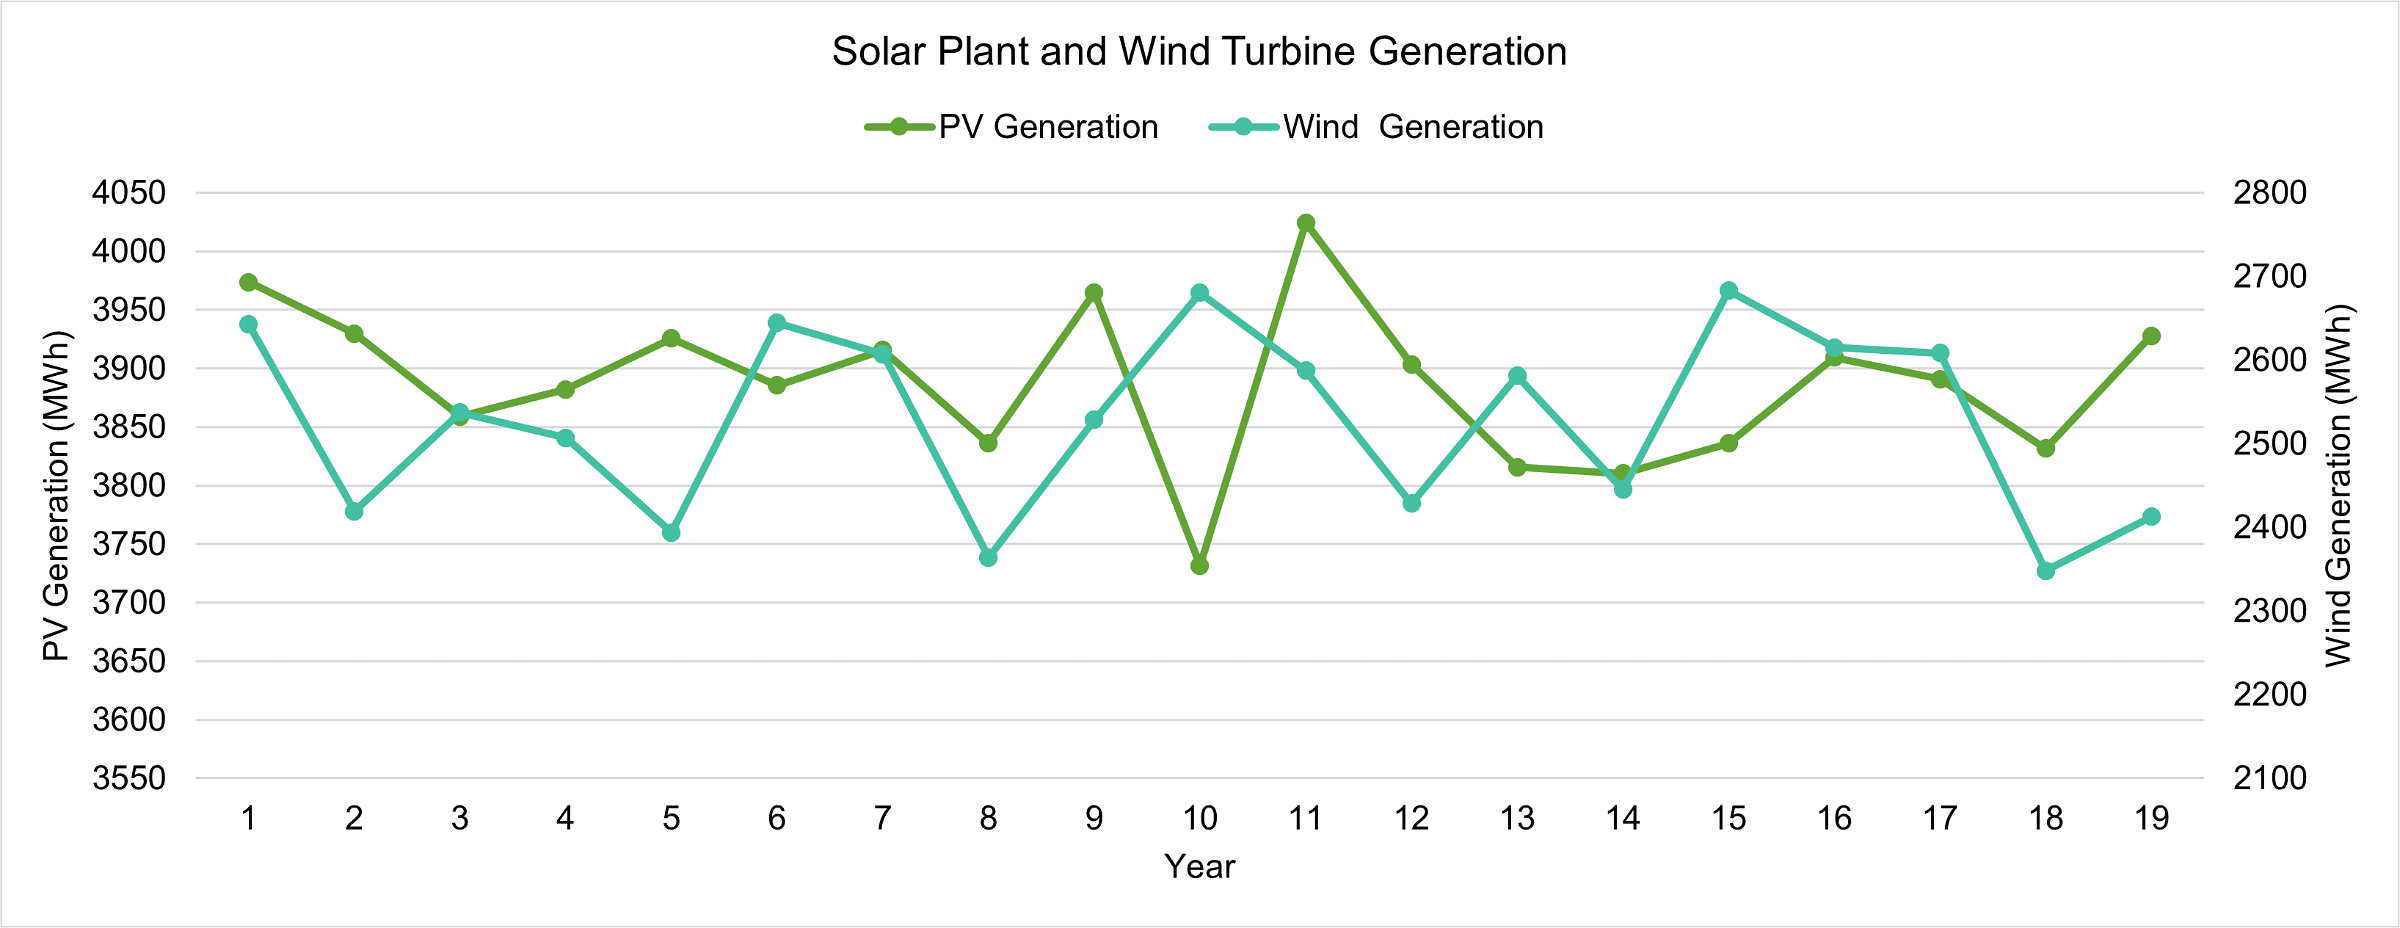 Inter Annual variation for Solar and Wind Power Generation